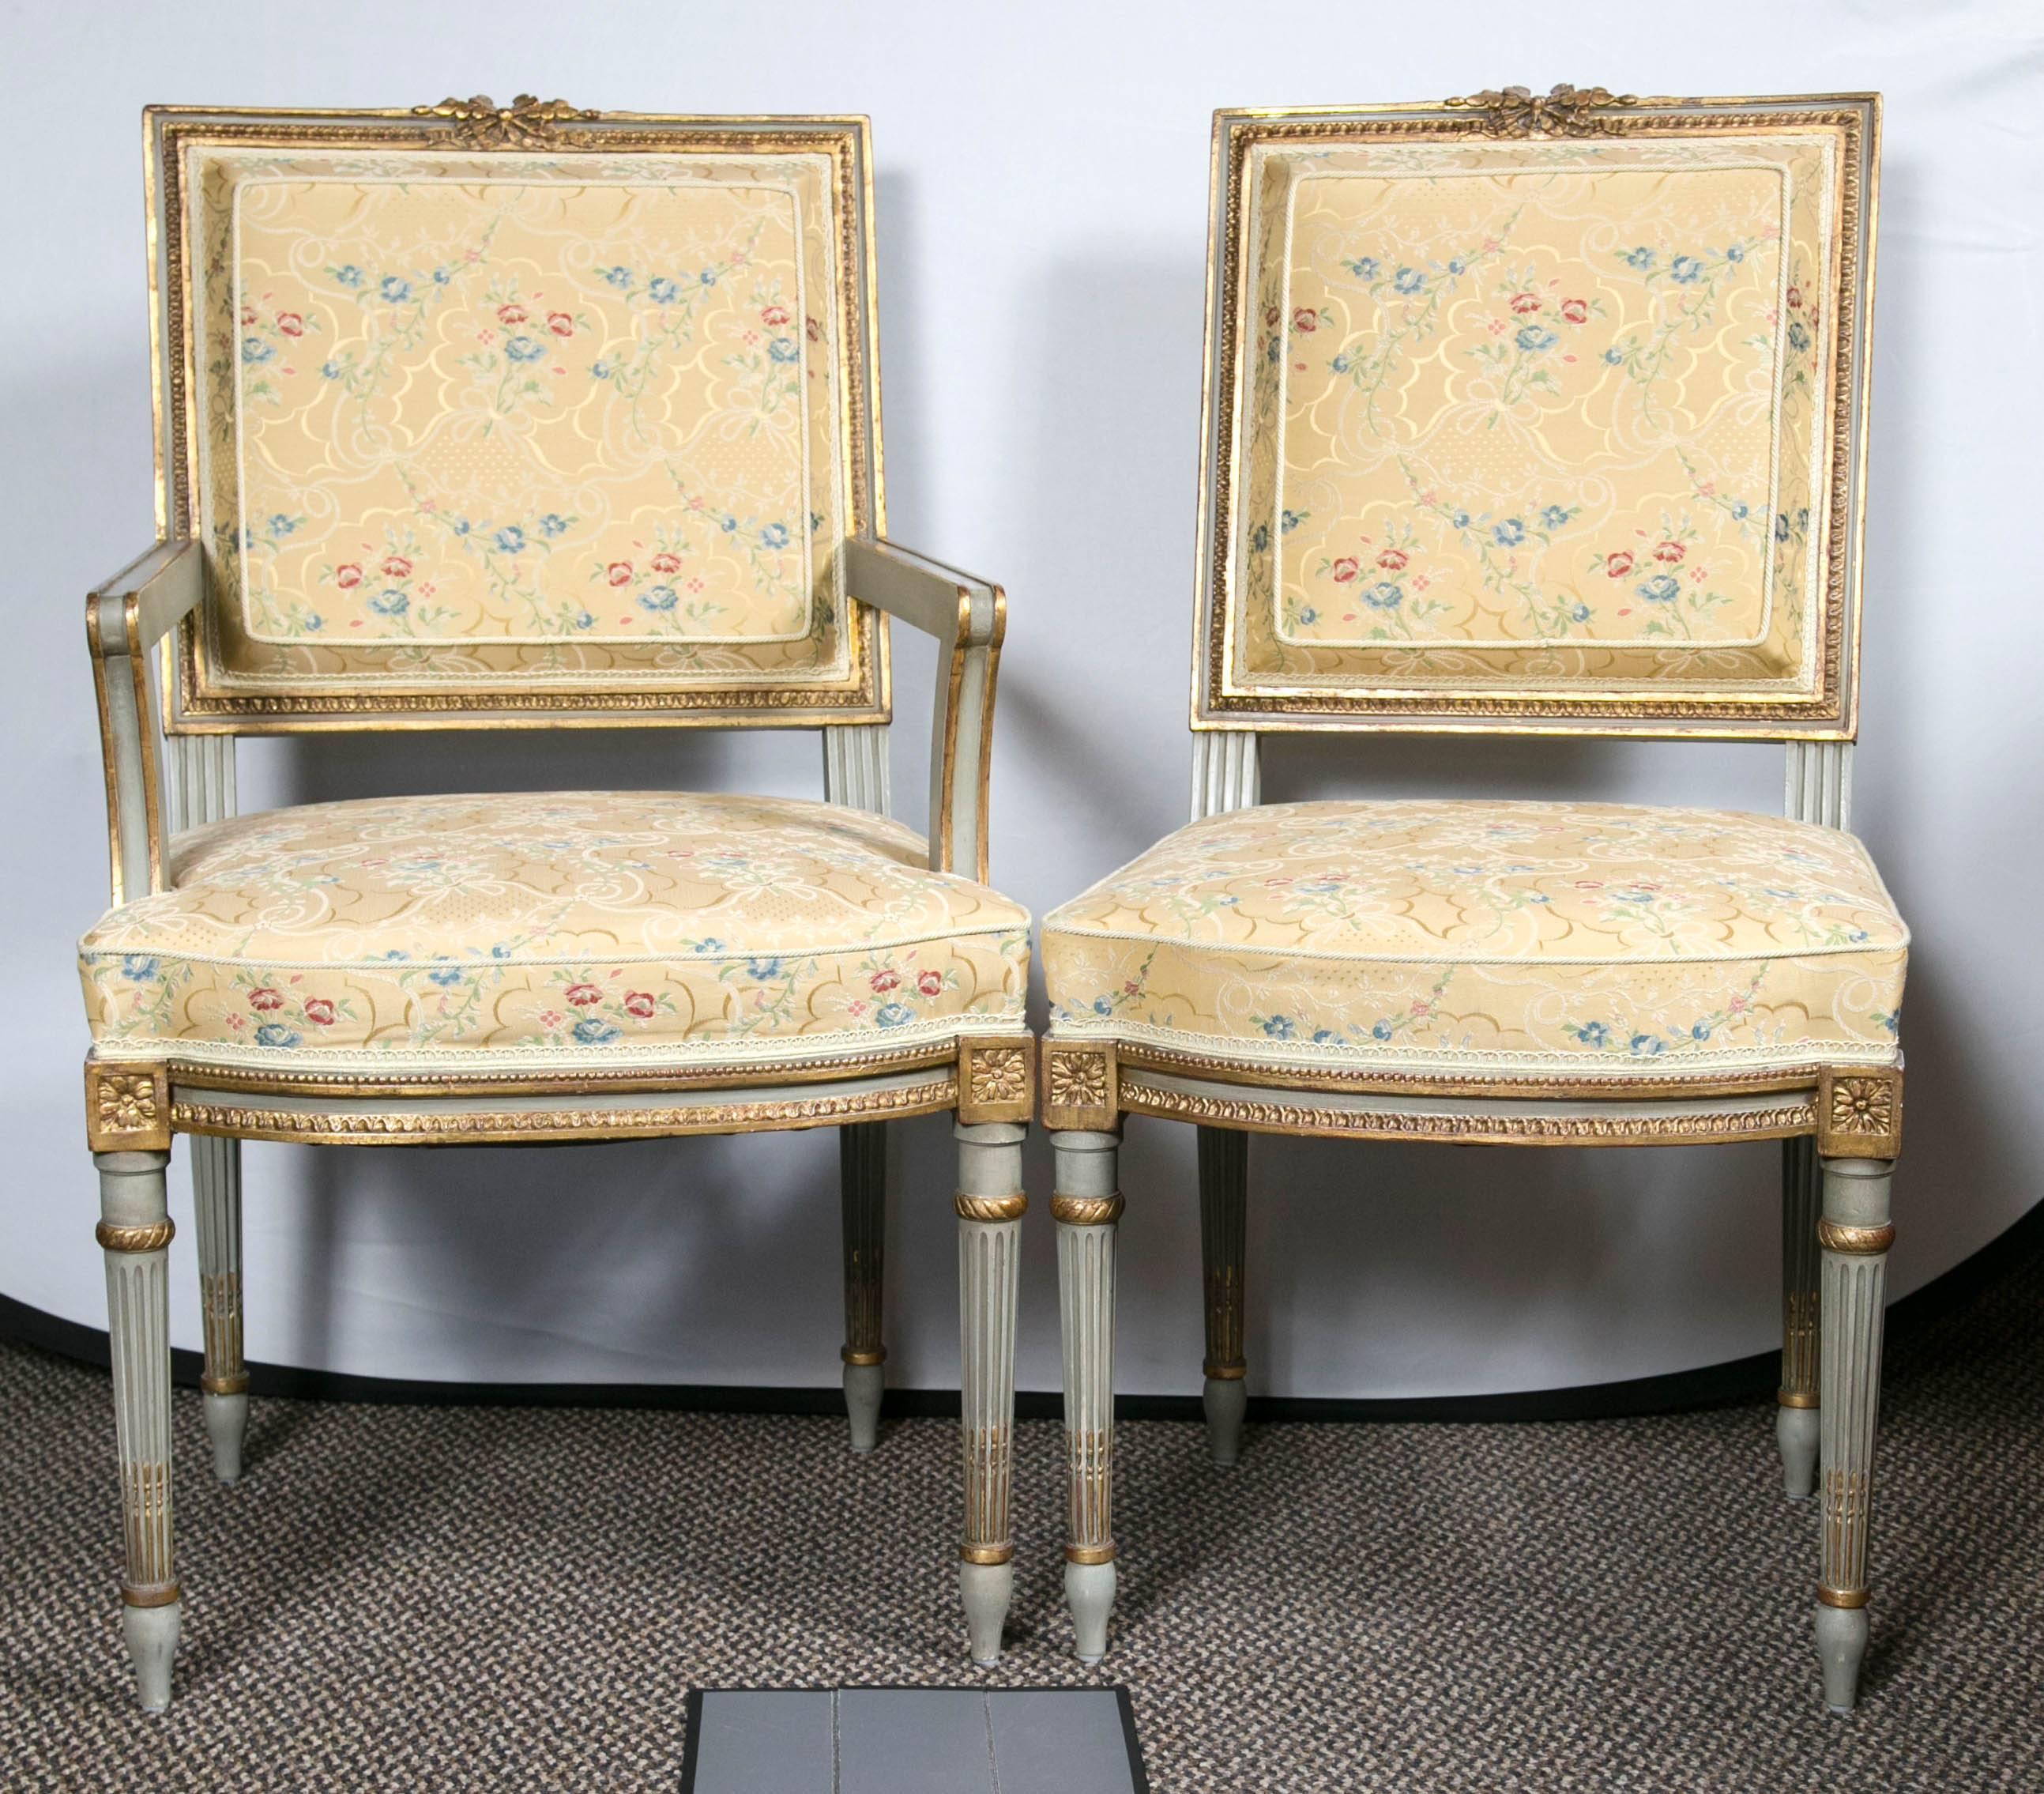 Set of Four Maison Jansen dining chairs.  I almost fell over when I first saw this fantastic set of Maison Jansen dining chairs. Simply the finest I have ever seen and certainly owned. The spectacular Scalamandré fabric is second to none. The